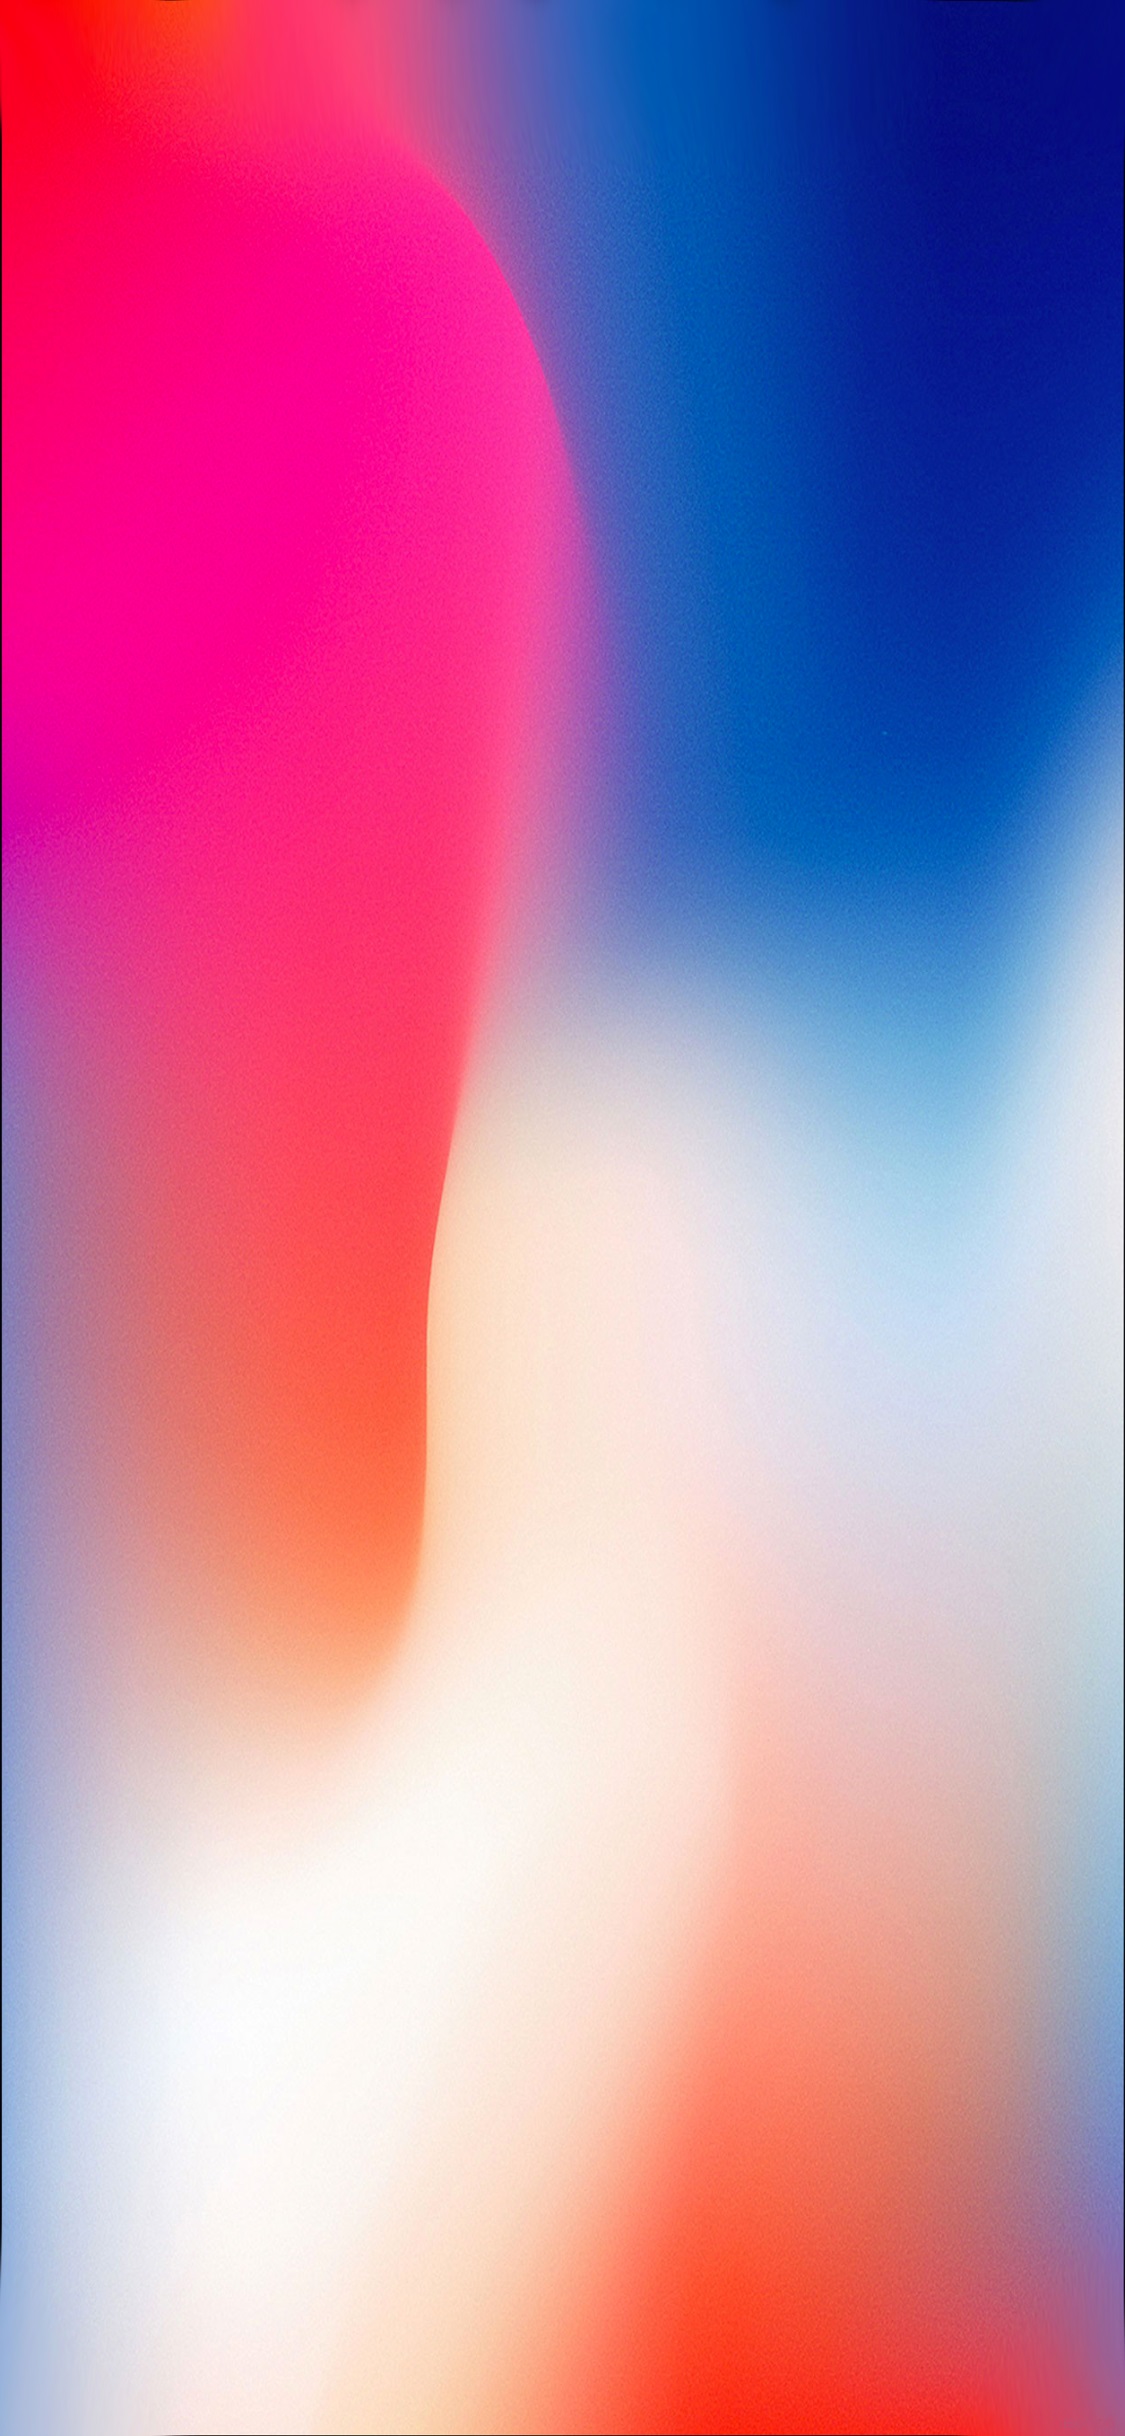 Hd For Iphone 6 Plus 1080P Wallpapers